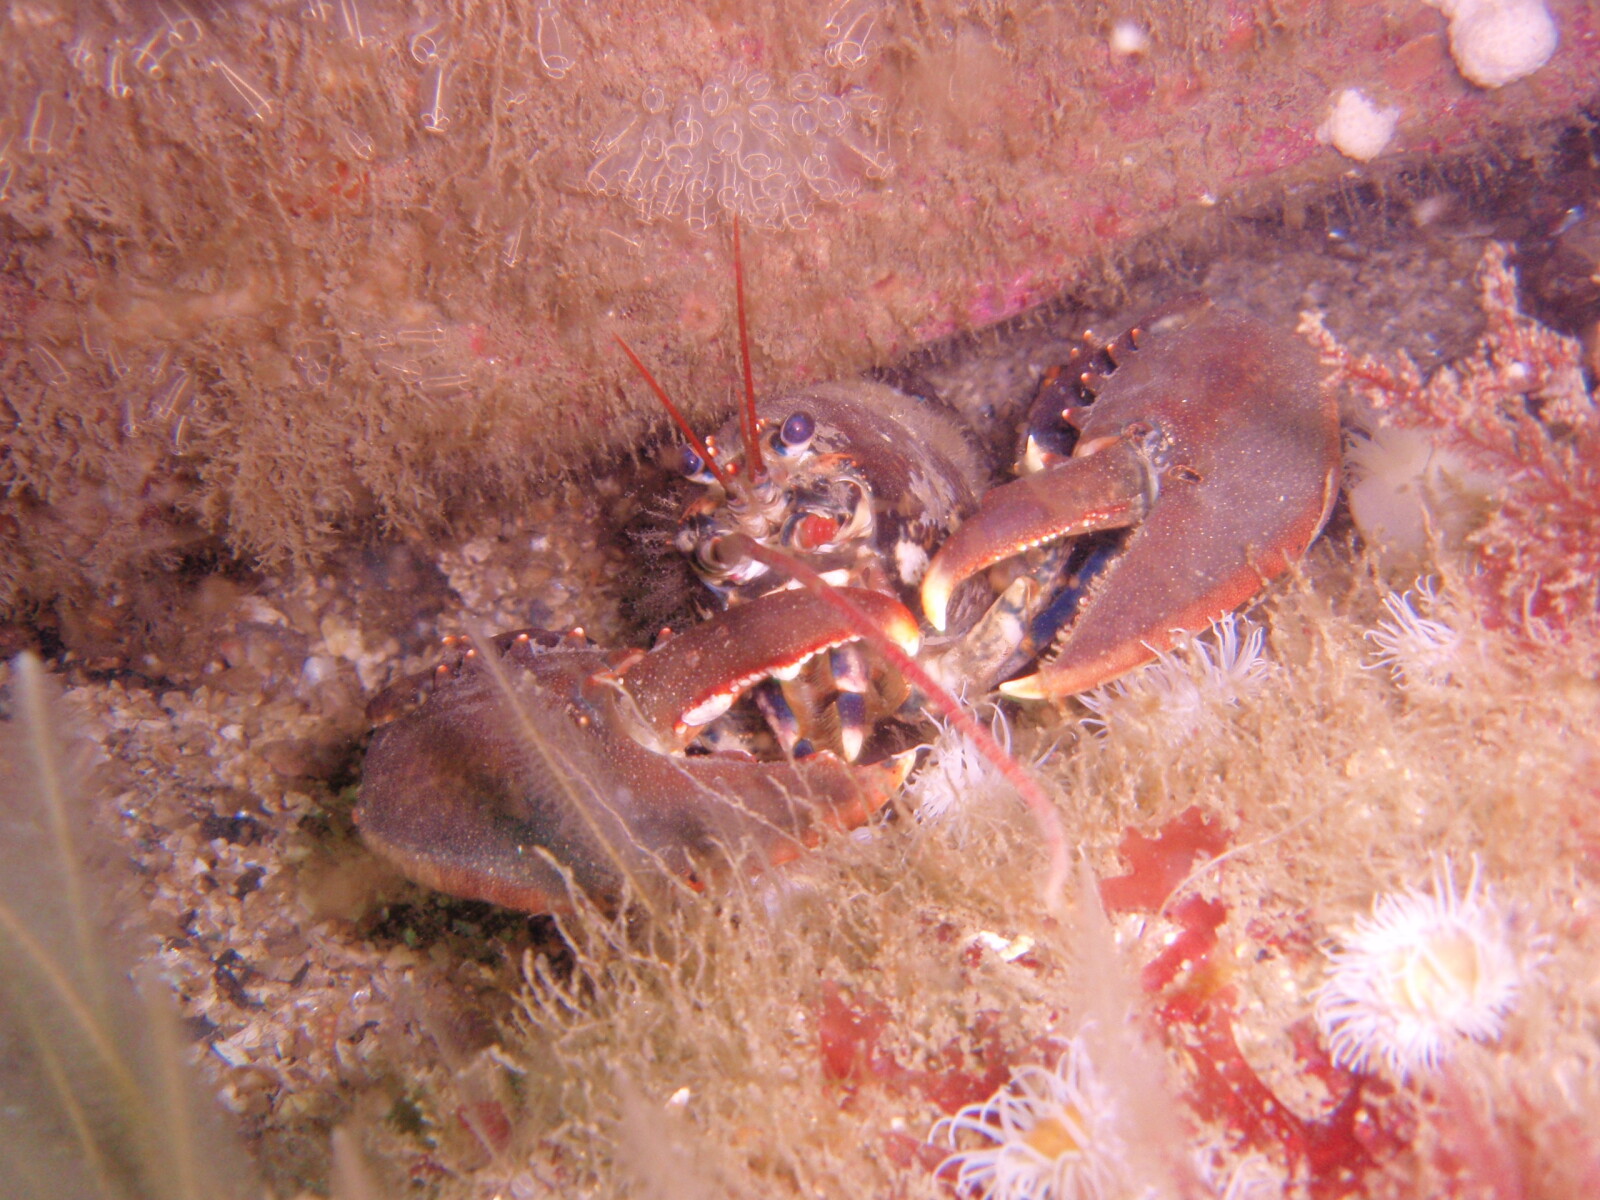 Common European Lobster, Homarus gammarus. Like other crustaceans they  have a hard exoskeleton strengthened with both calcium carbonate and calcium phosphate (Teresa Darbyshire, NMW)